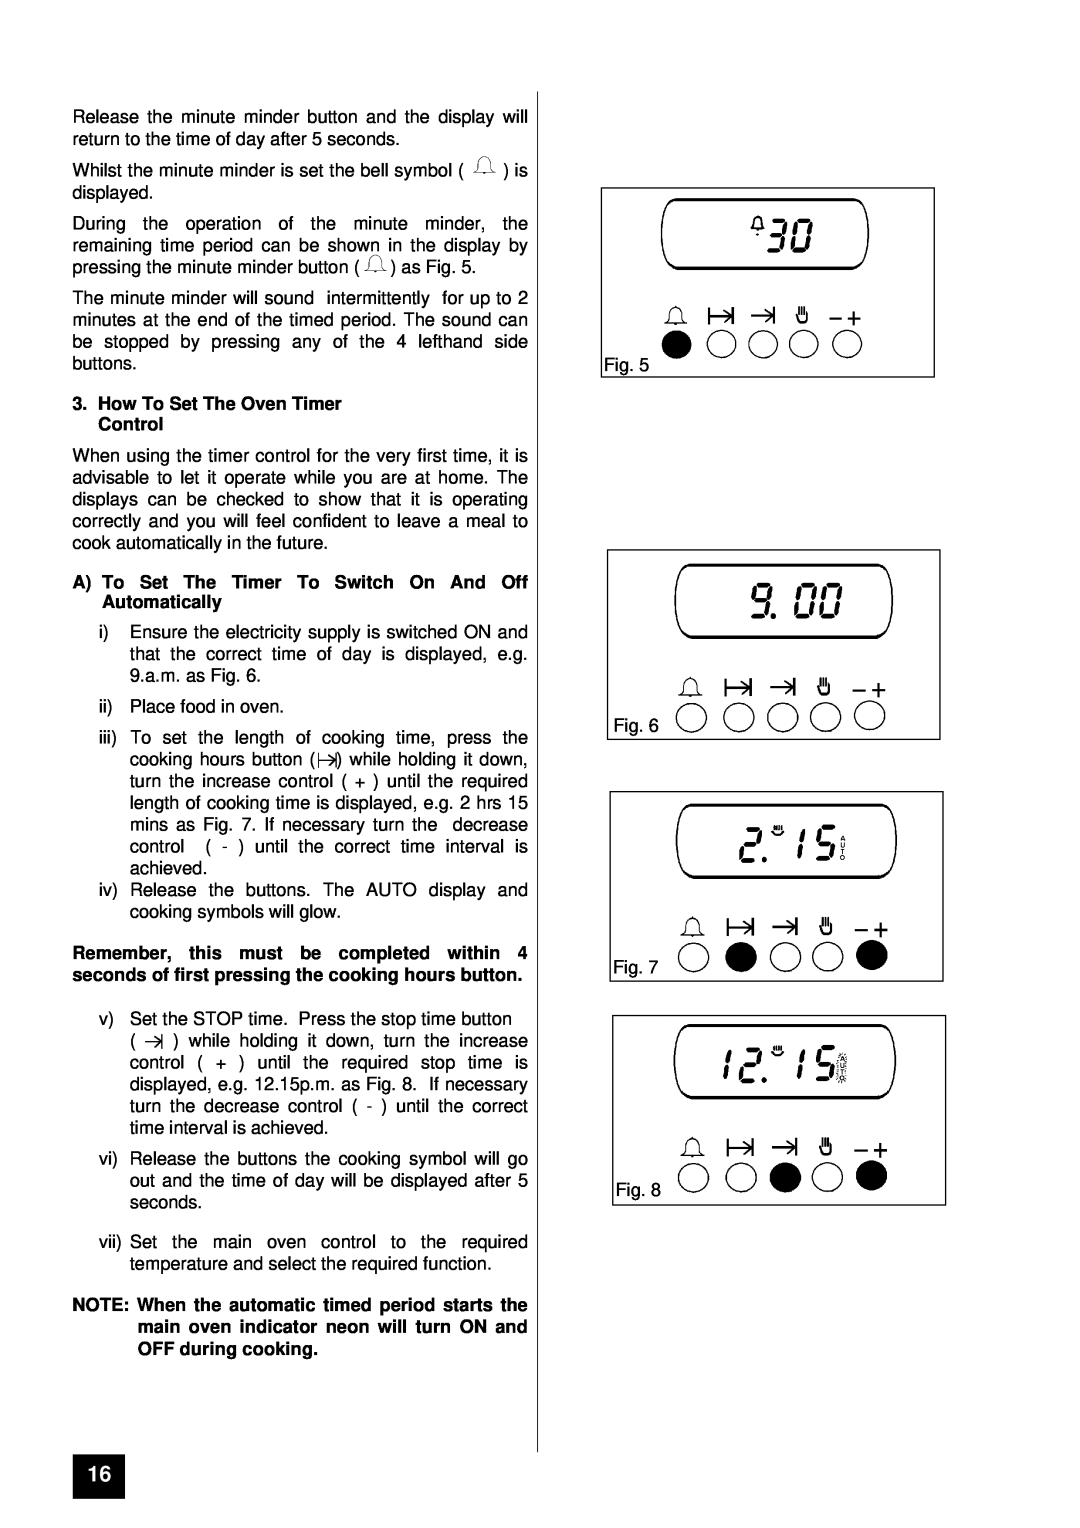 Tricity Bendix TBD903 How To Set The Oven Timer Control, A To Set The Timer To Switch On And Off Automatically 